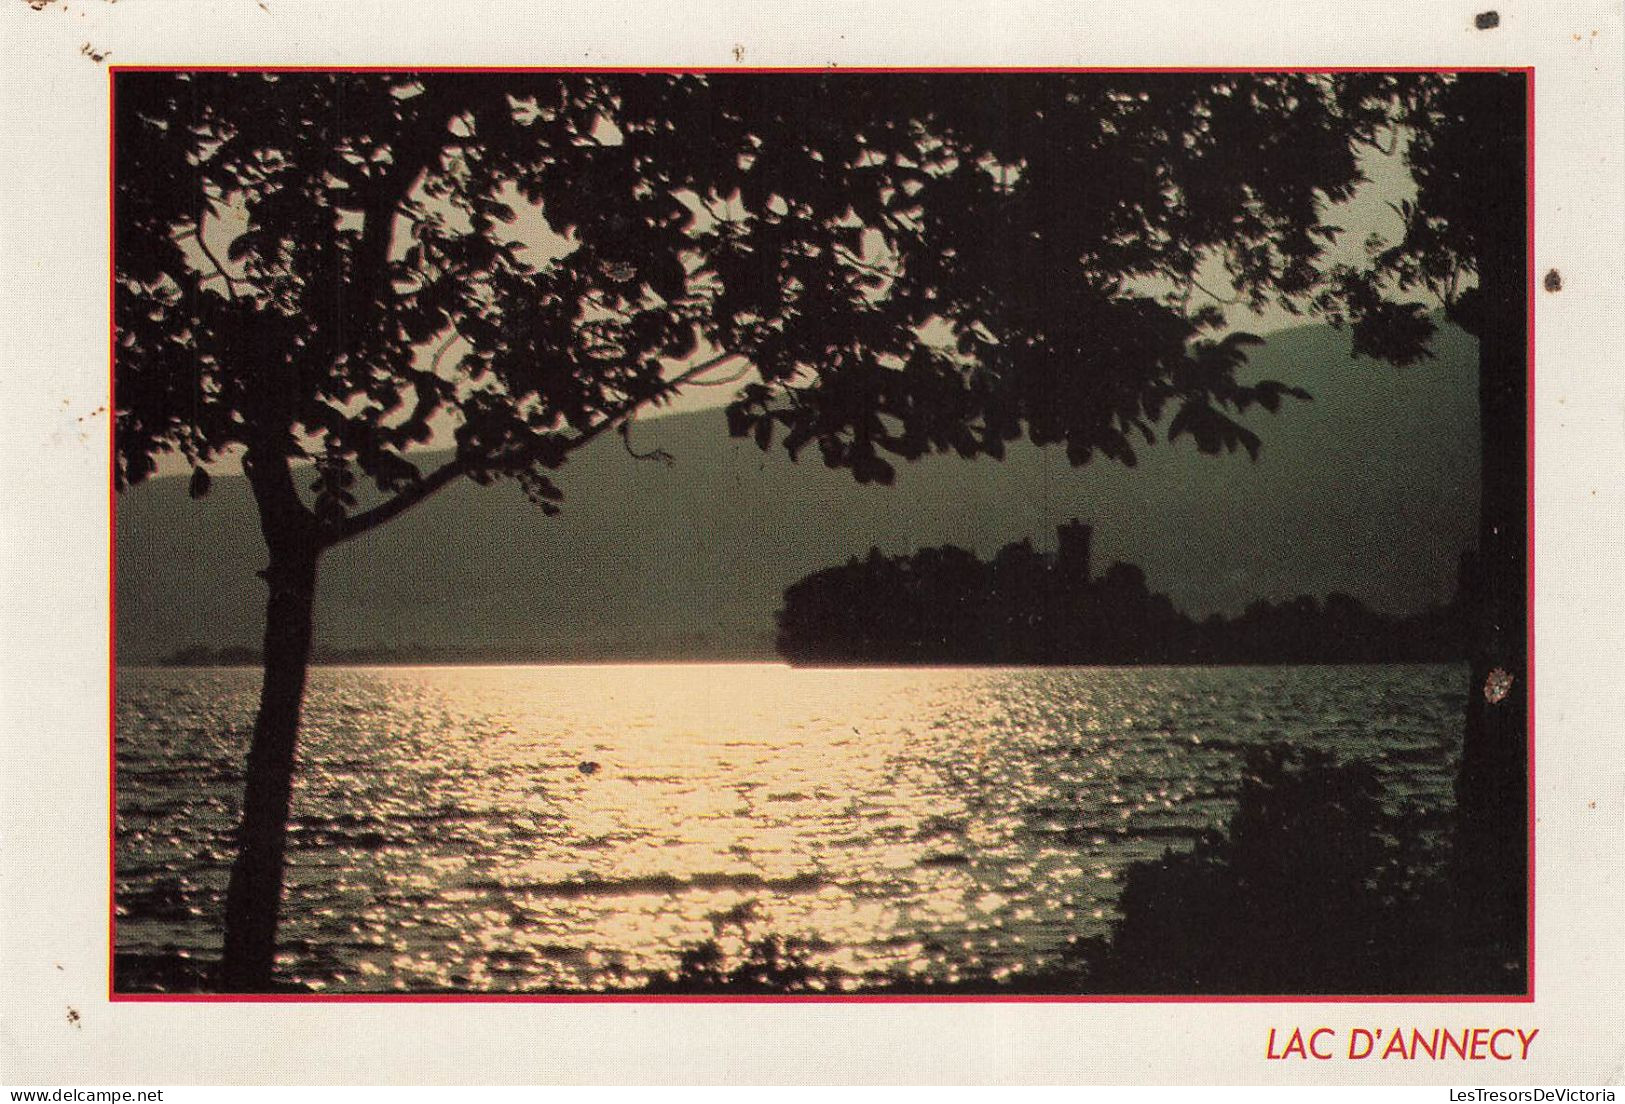 FRANCE - Annecy - Lac D'Annecy - Carte Postale - Annecy